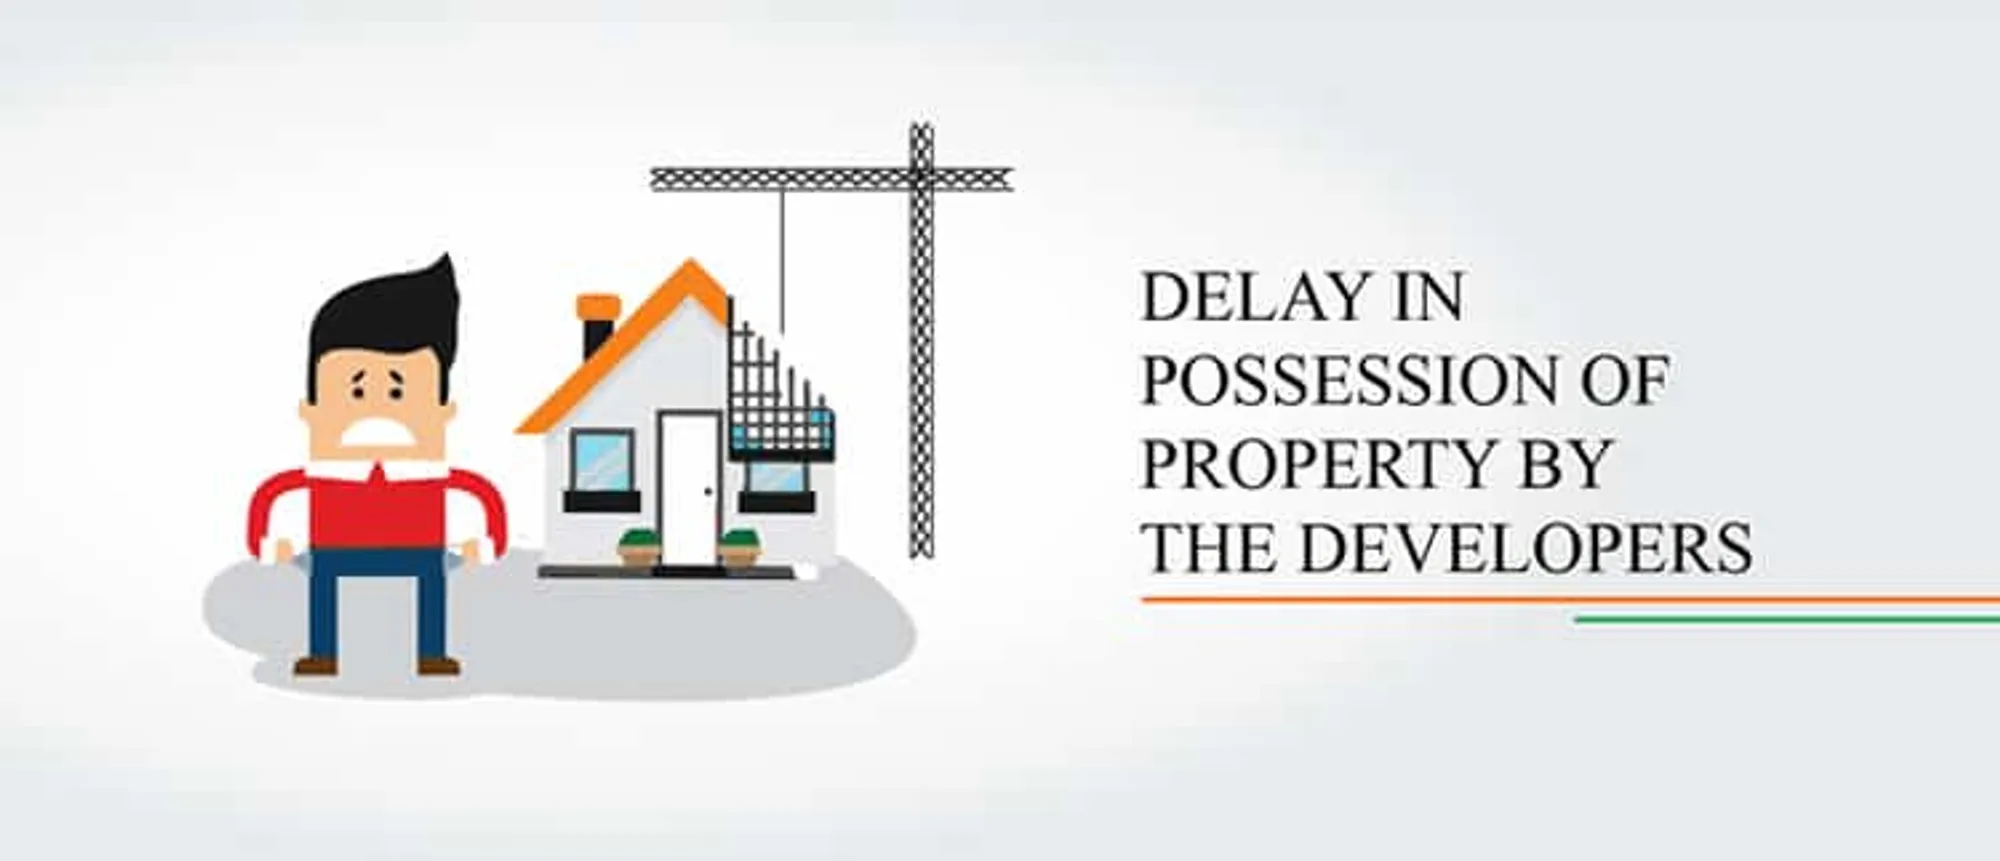 Delay in Possession of Property by the Developers